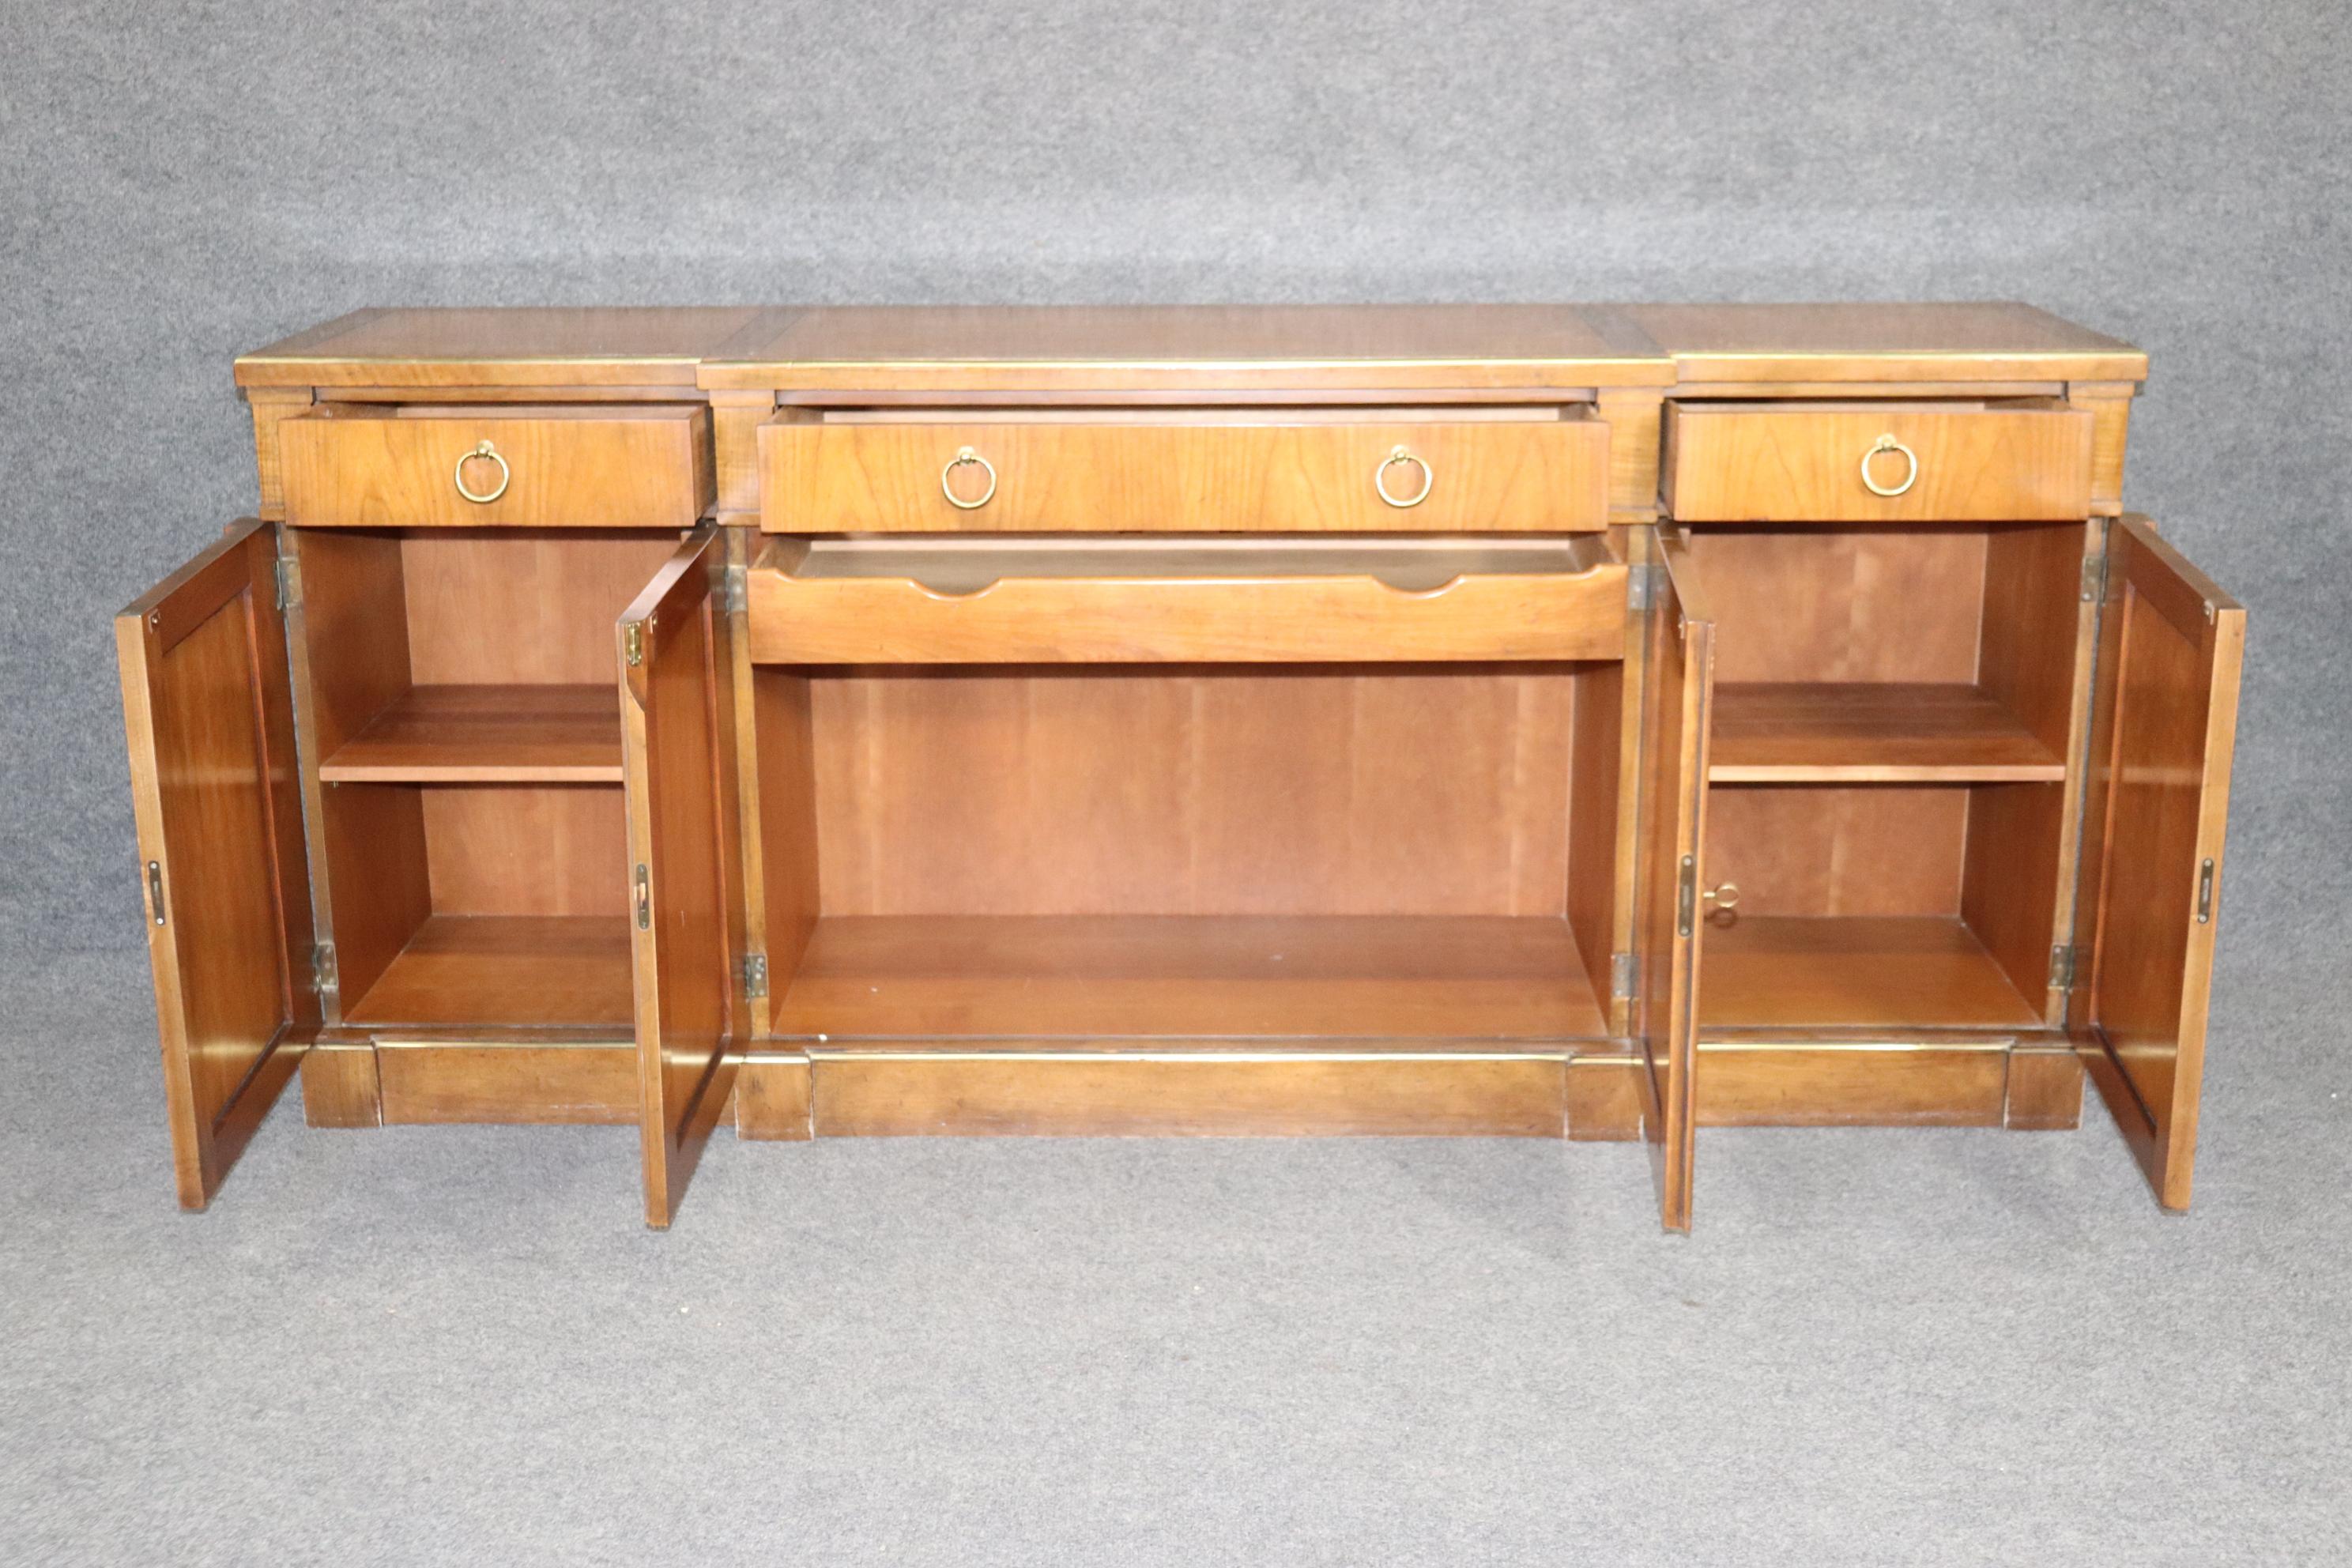 This is a stunning and sublime Baker sideboard in the Directoire manner. The sideboard is in good condition and features bright brass ring pulls and gorgeous brass trimmed doors. The 